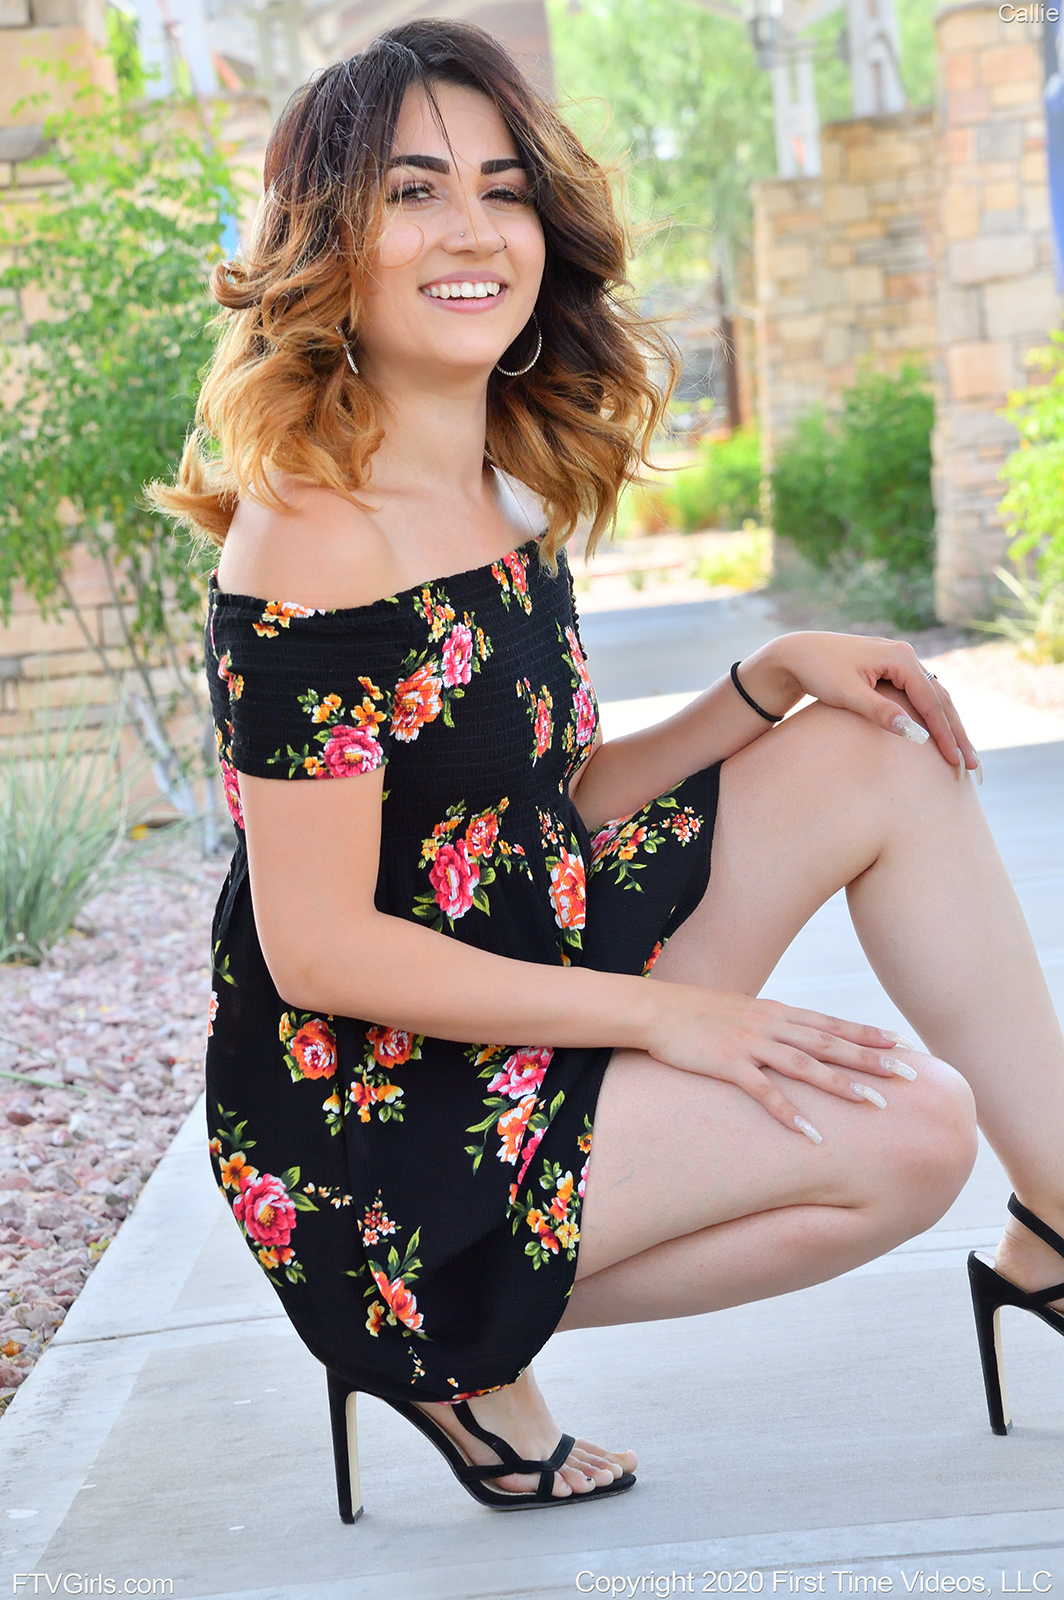 teen pornstar Callie FTV is non nude wearing a black floral dress and high heels while in squat position on a concrete floor outdoors and smiling at the camera in Girl Next Door Style